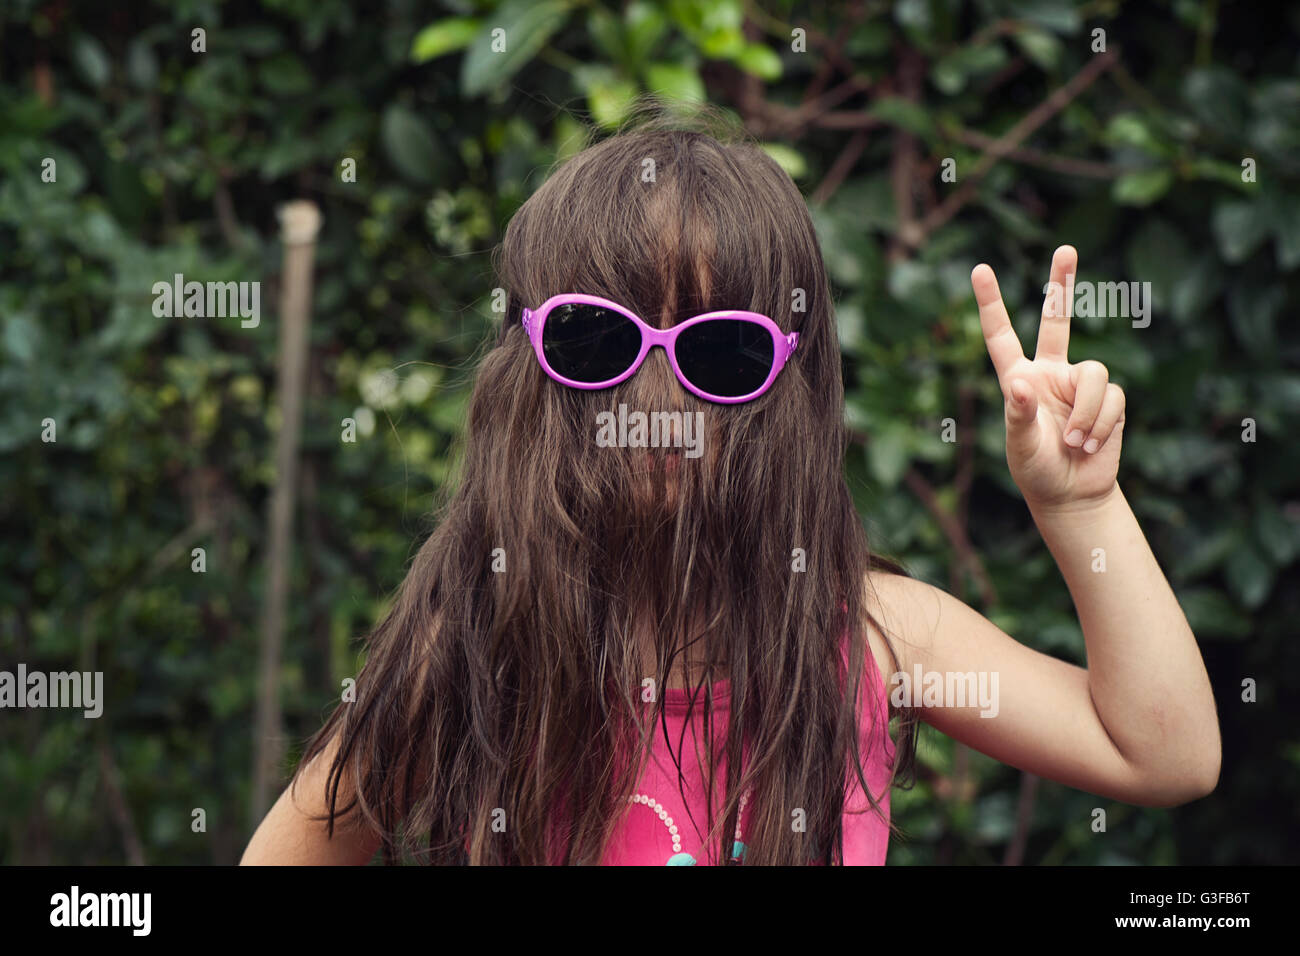 Little girl with hair over face wearing sunglasses,showing a peace sign Stock Photo